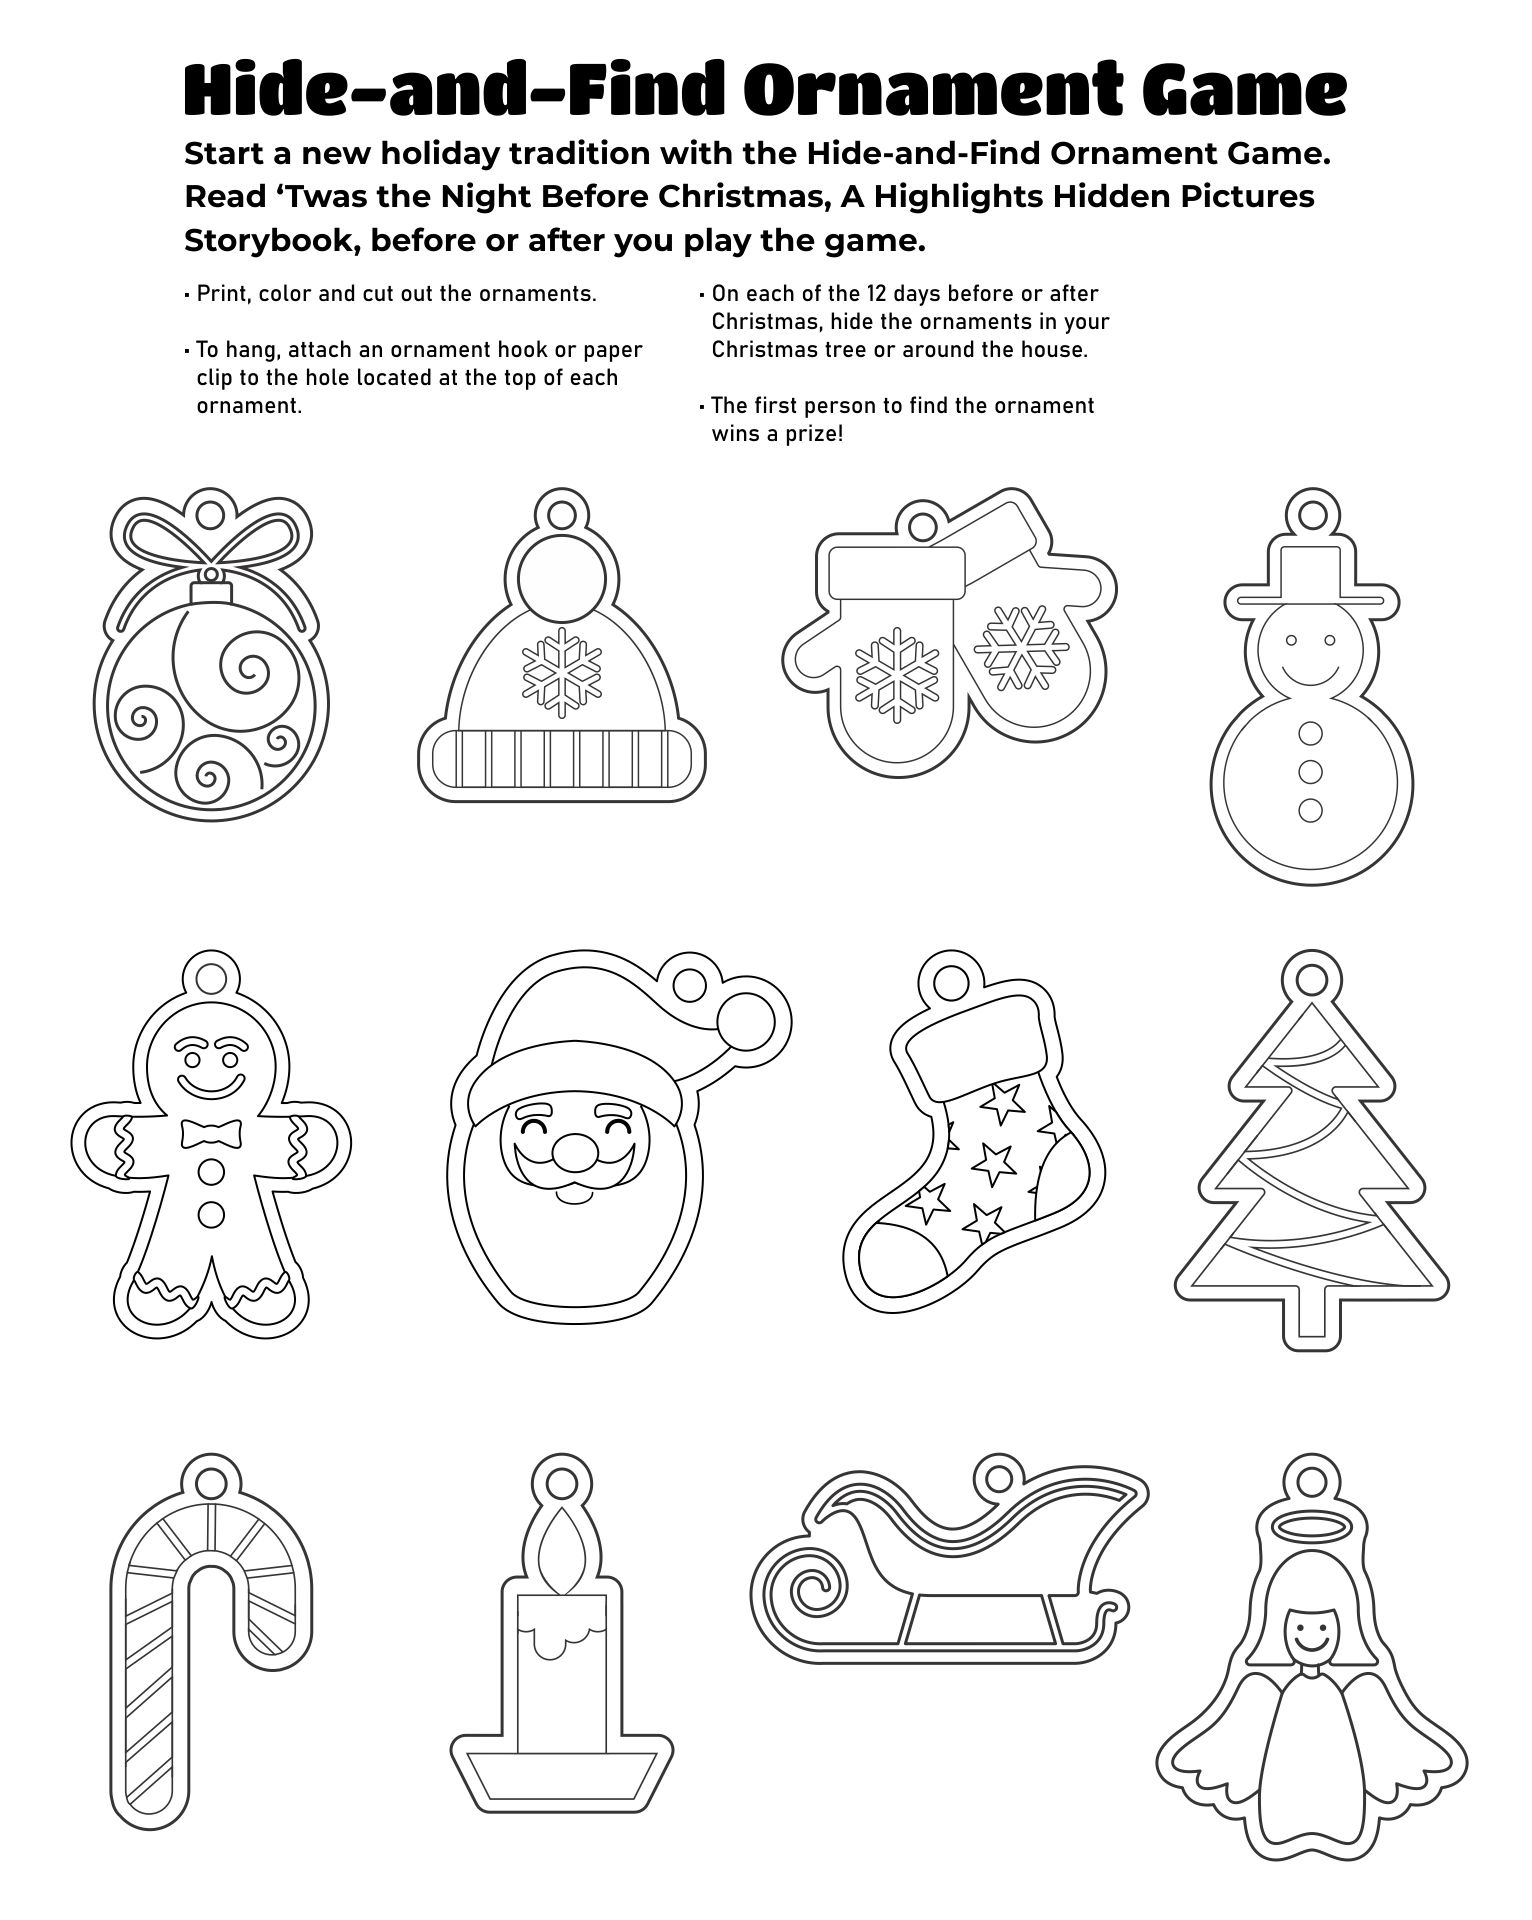 Hide-and-Find Christmas Ornaments Printable